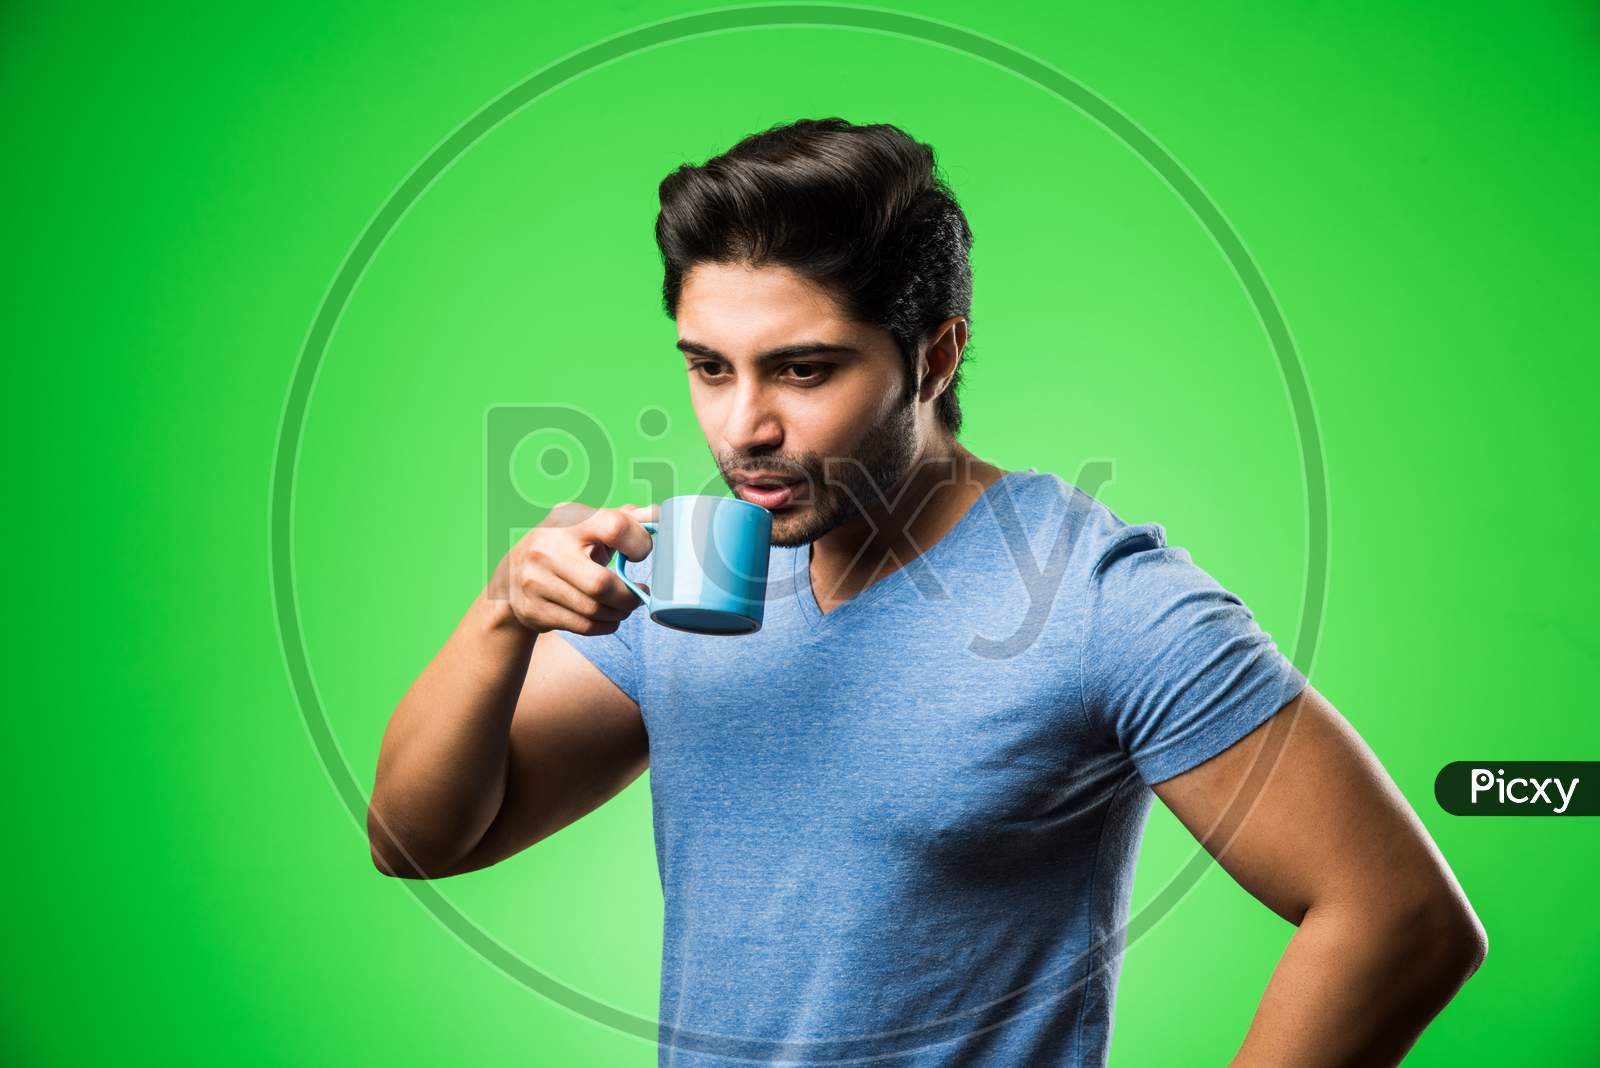 Indian man with tea / coffee cup or mug. Drinking, presenting or holding while standing isolated over green background